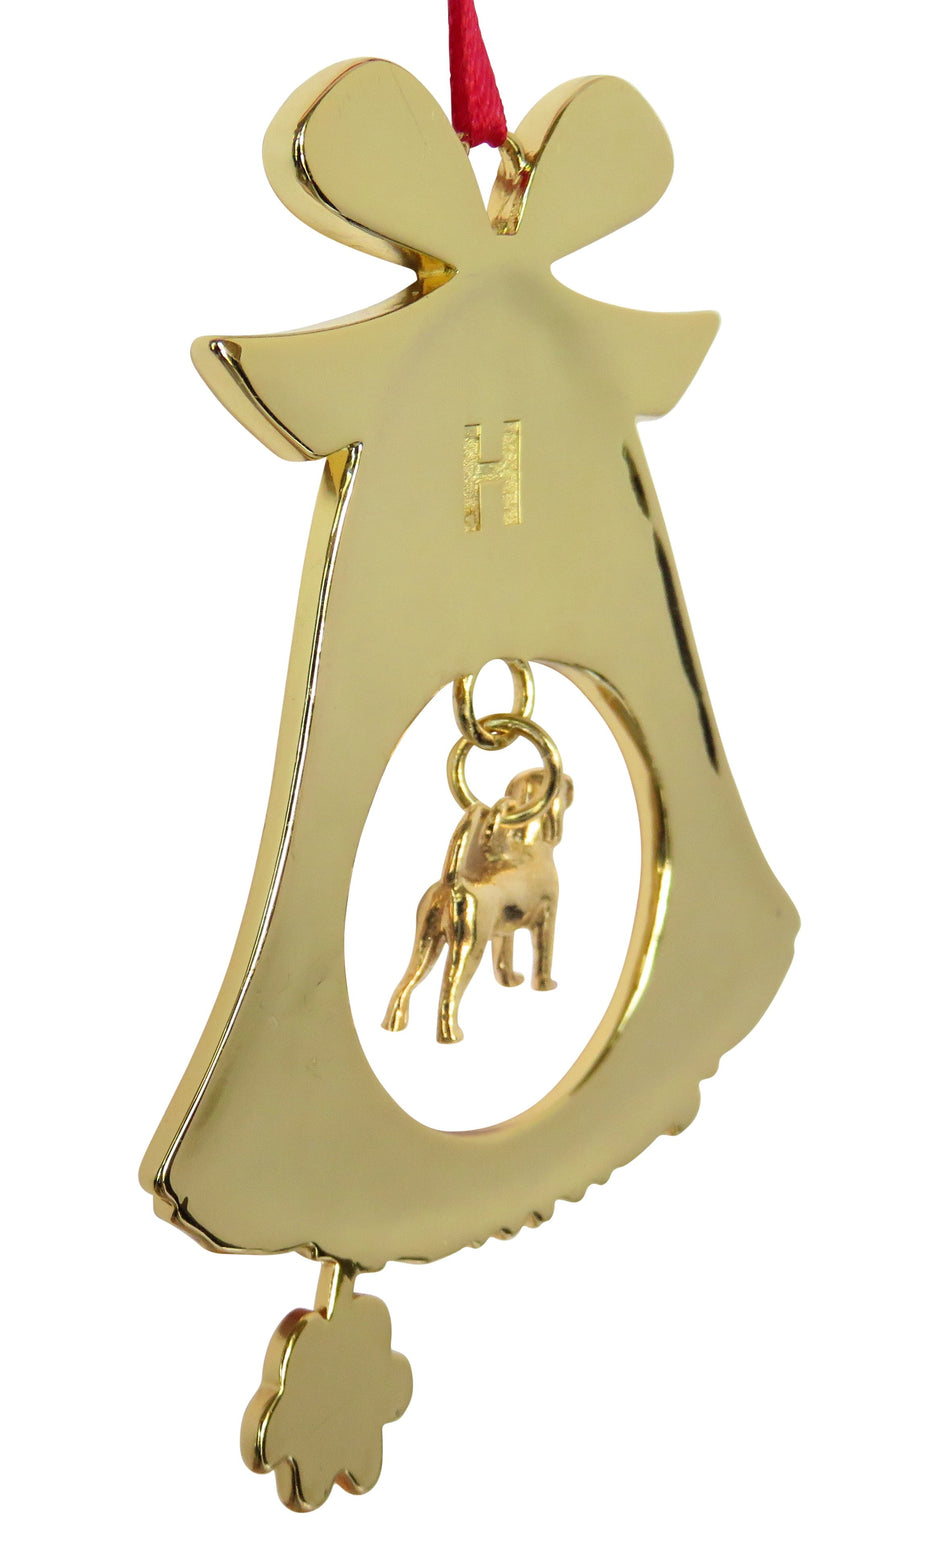 Beagle Gold Plated Holiday Bell Ornament